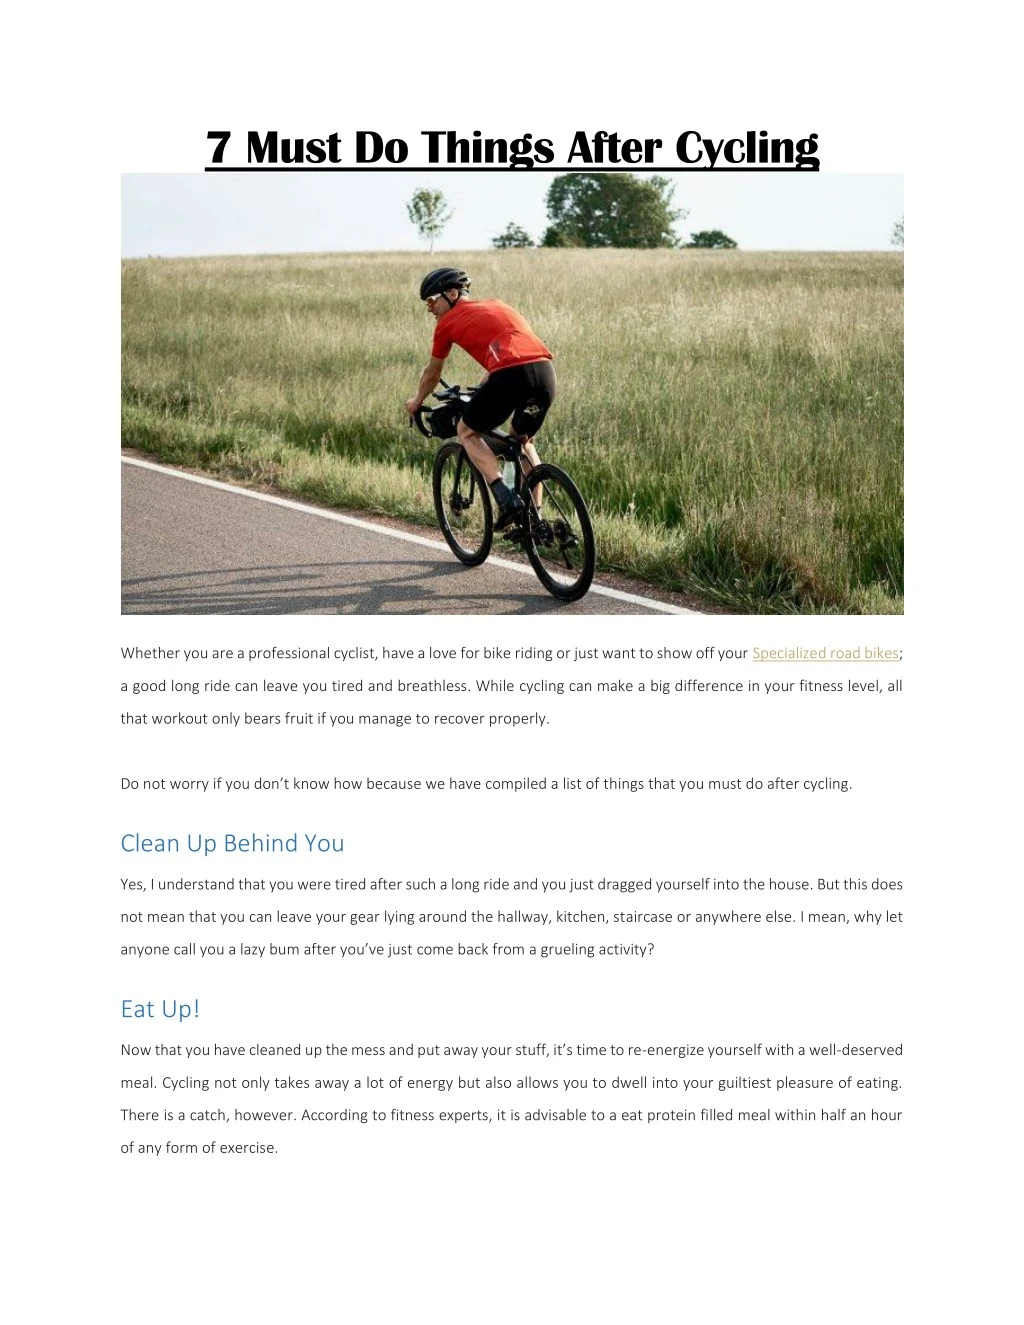 7 must do things after cycling